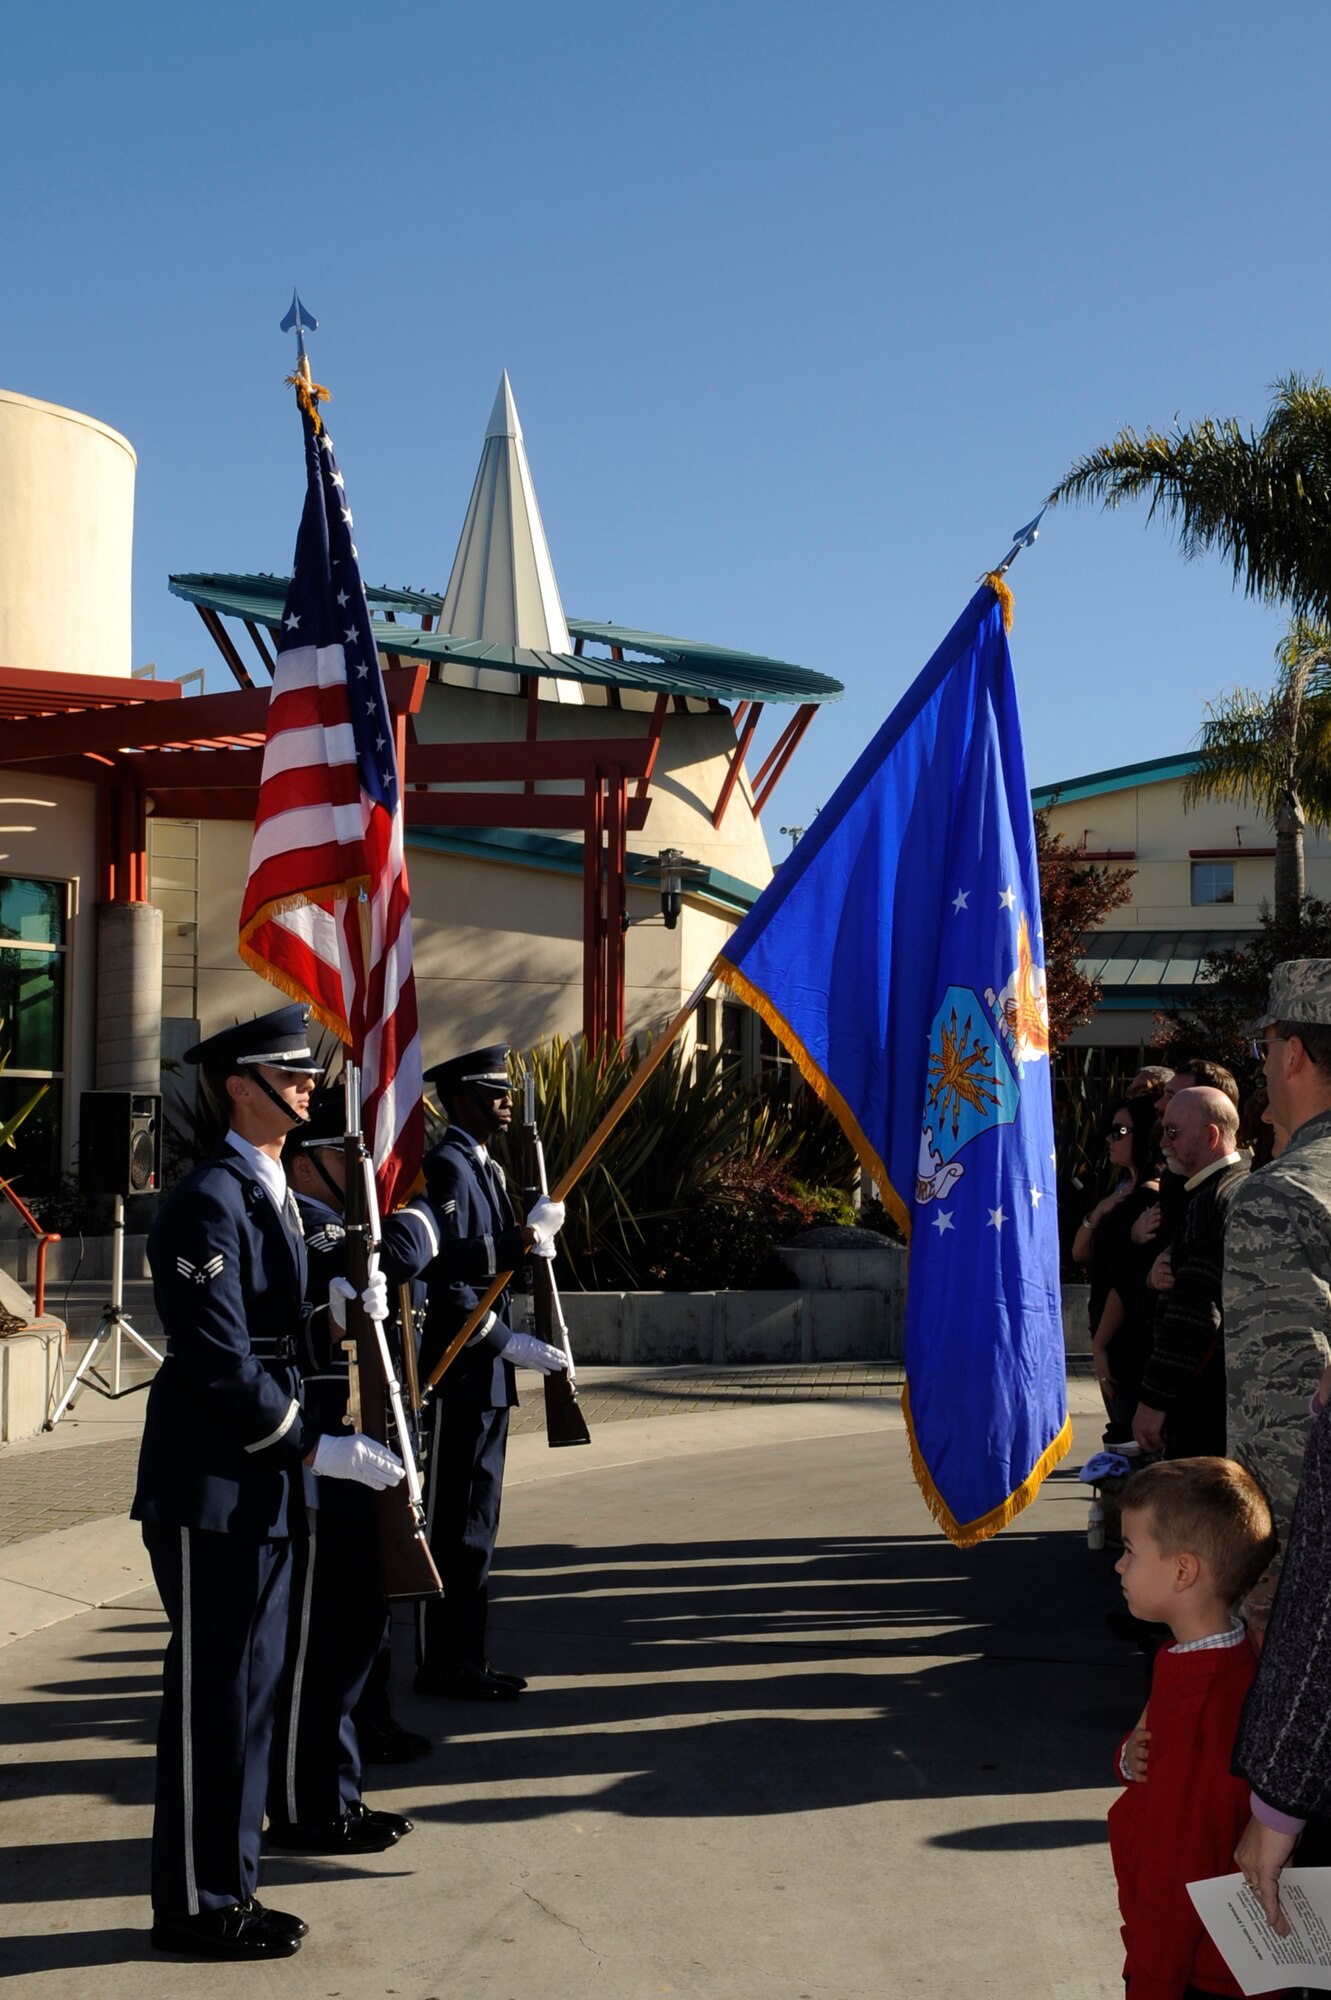 SANTA MARIA, Calif.  – The Vandenberg Honor Guard posts the colors here during a plaque dedication ceremony in honor of fallen Senior Airman Daniel Johnson on Tuesday, Dec. 7, 2010. (U.S. Air Force photo/Airman 1st Class Lael Huss)